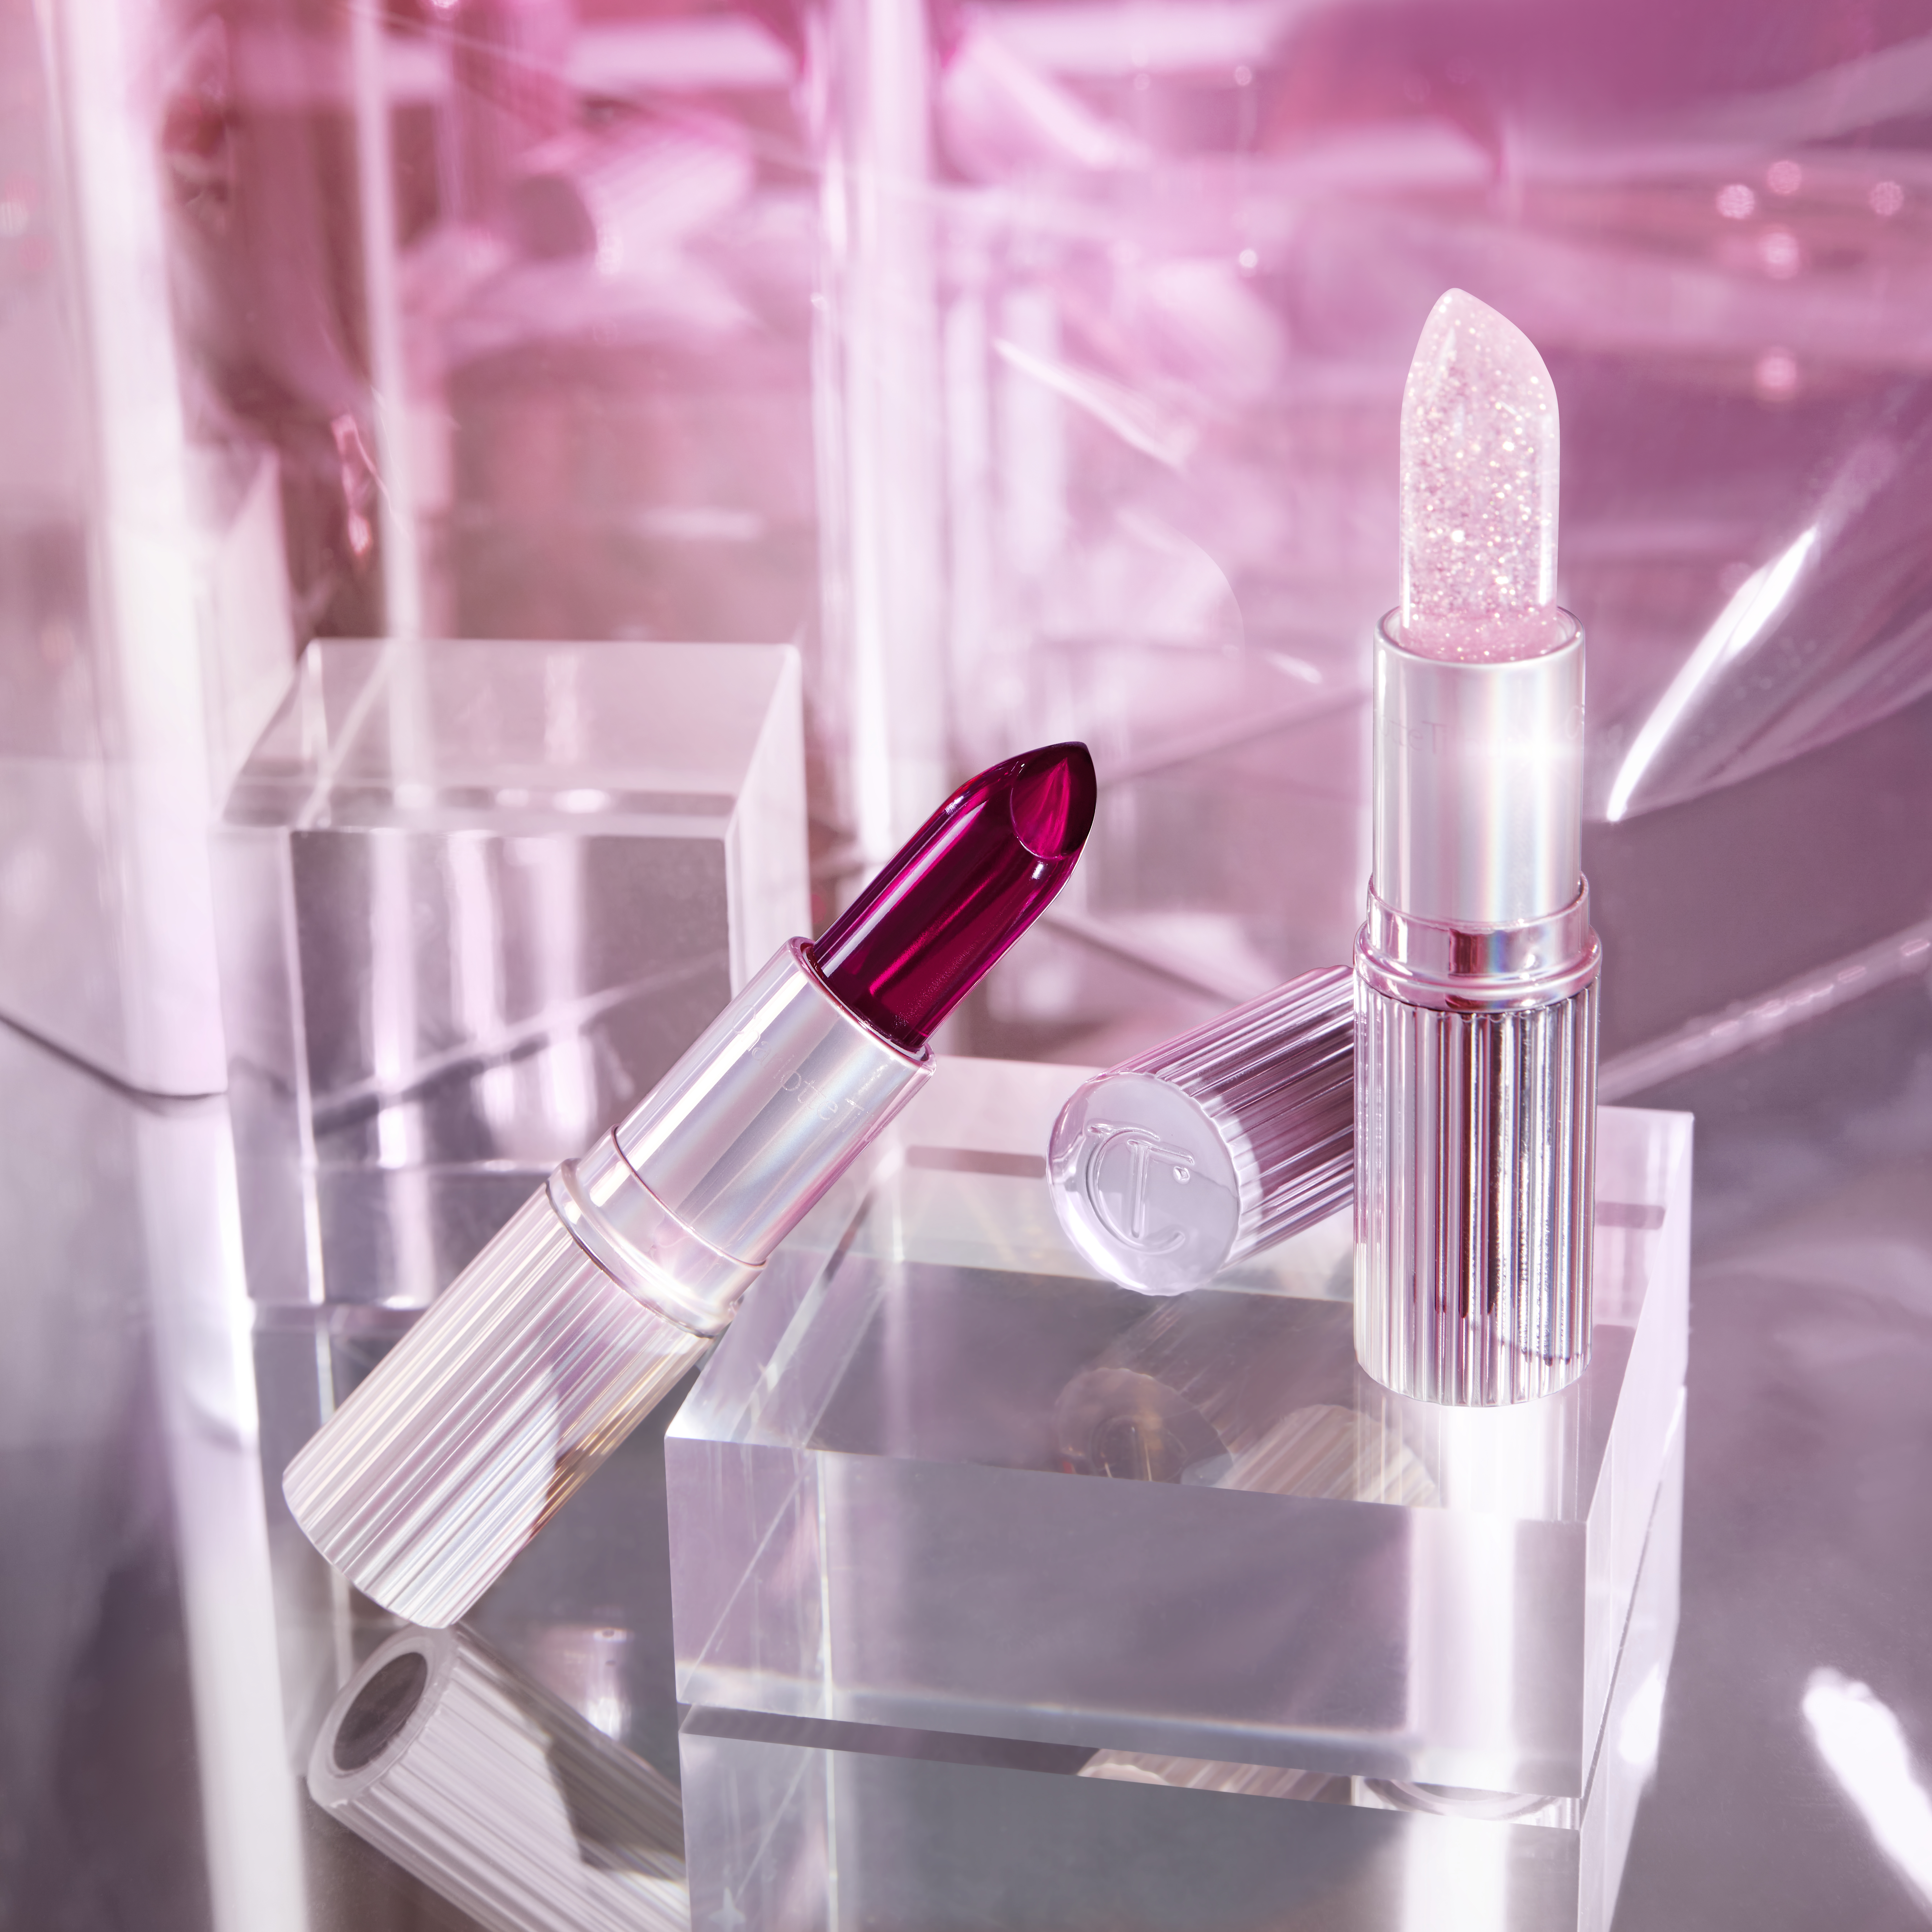 Two, open, colour-changing lipsticks in lilac-coloured tubes in a glowy red shade and glitter sheer pink shade. 